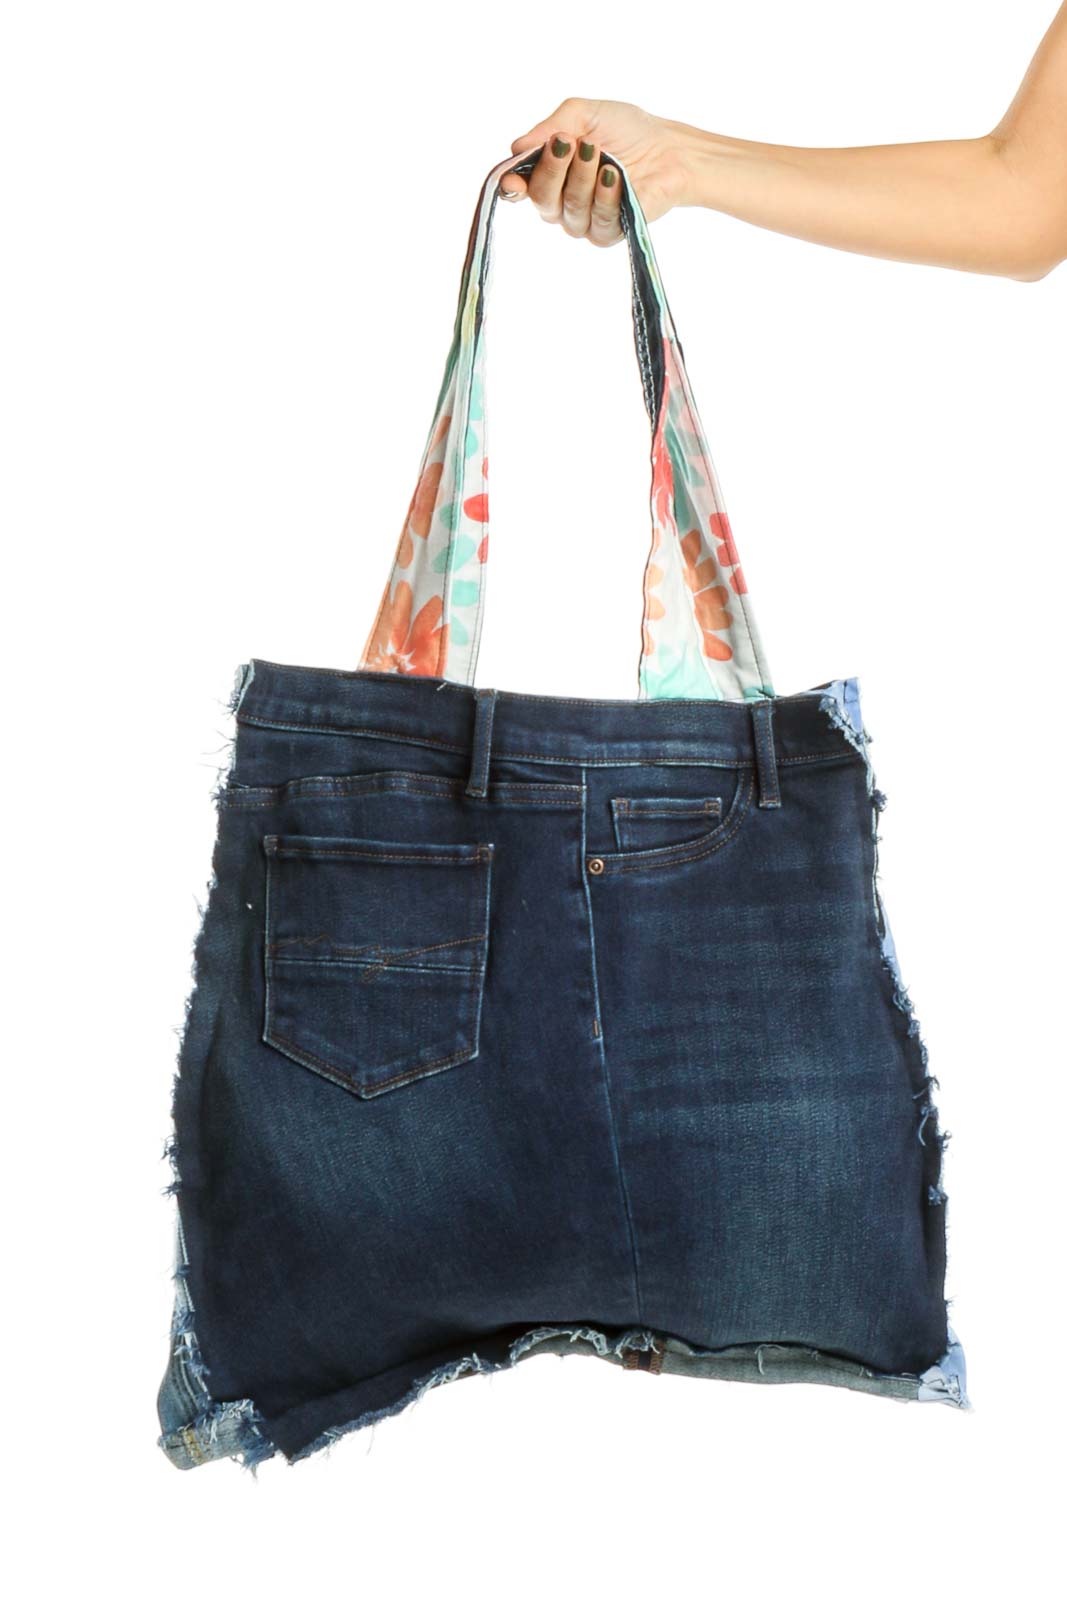 Reworked: Blue Denim Tote Bag with Side Pockets From Donated Denim Front